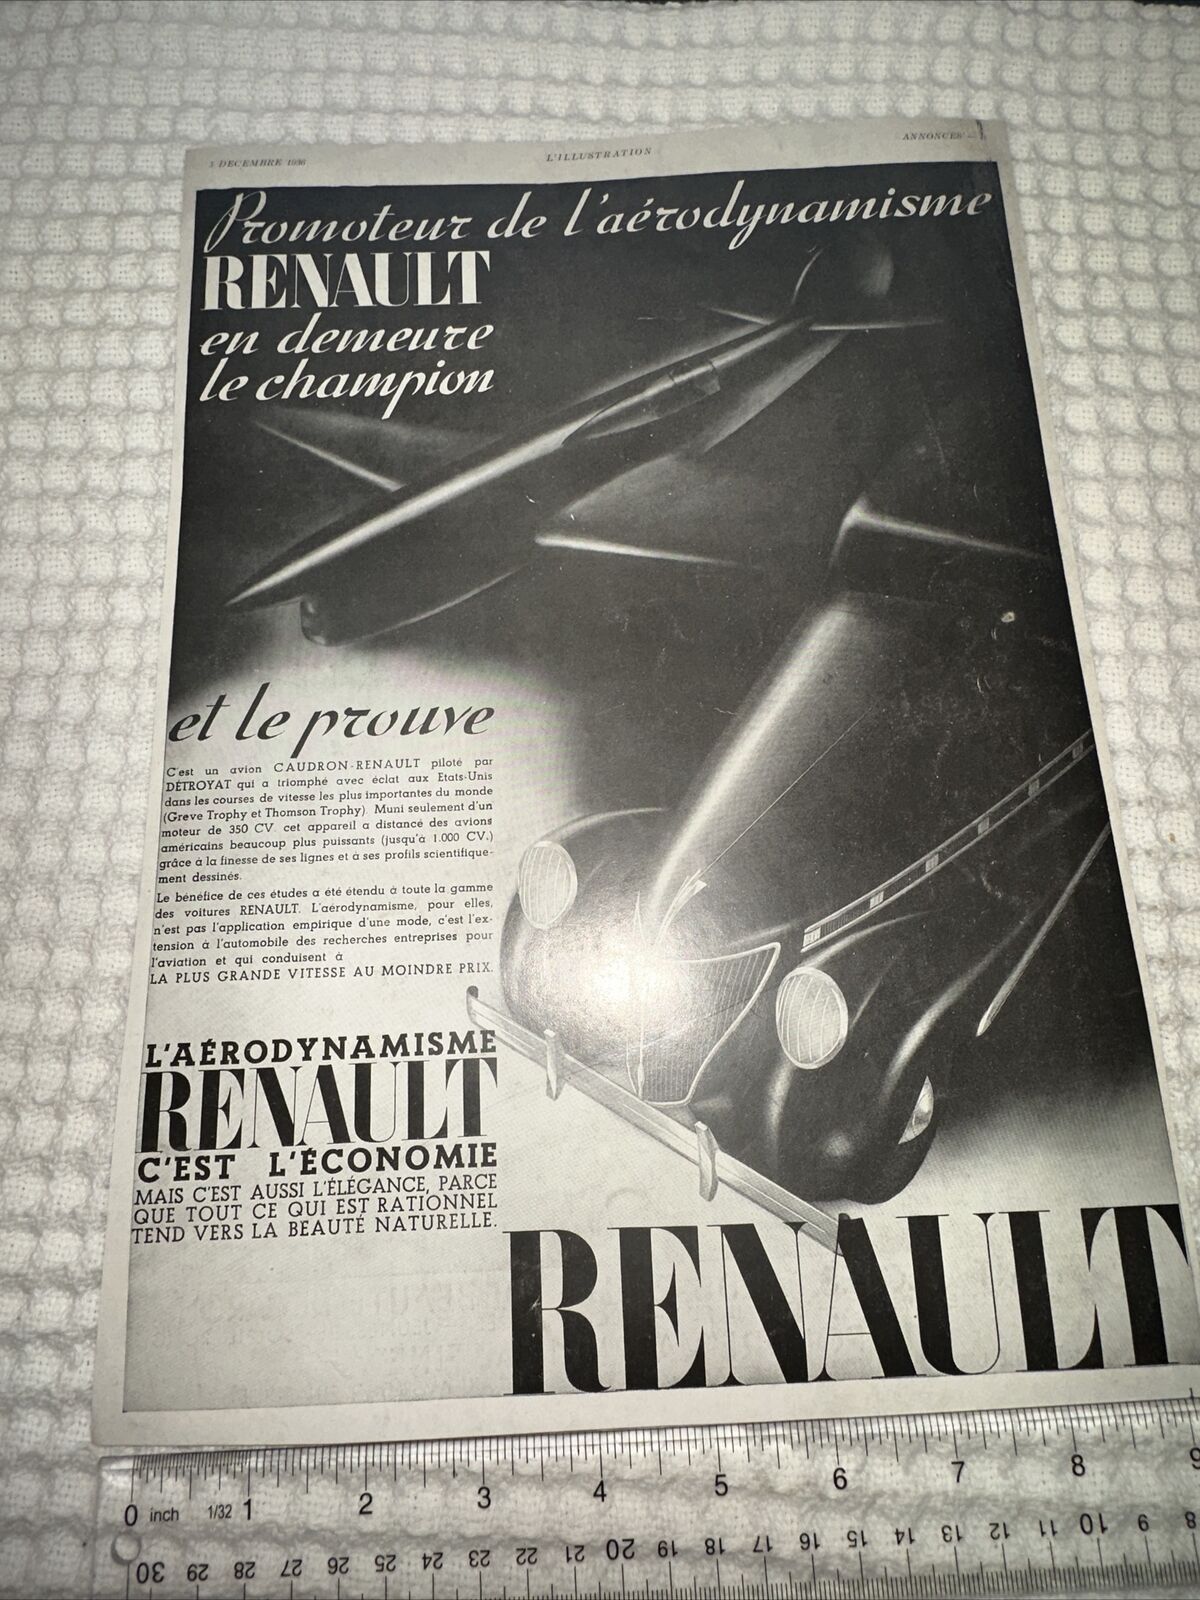 1936 ( PRINT AD ) Renault Automobile From a French Magazine 9 X 13 Approx.